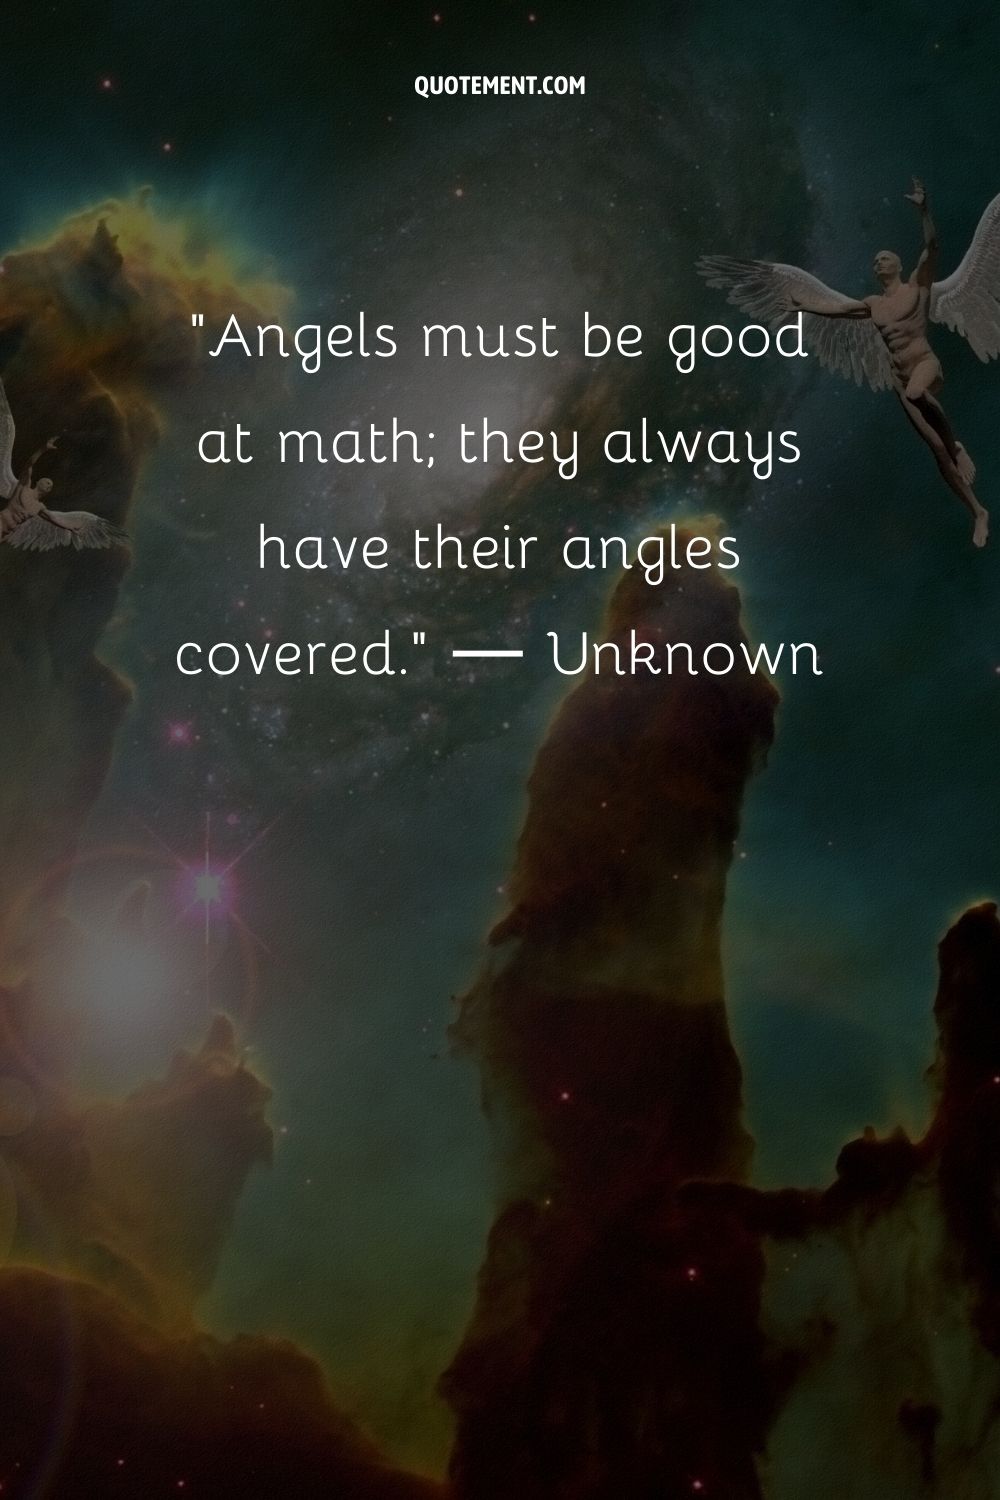 Angels must be good at math; they always have their angles covered